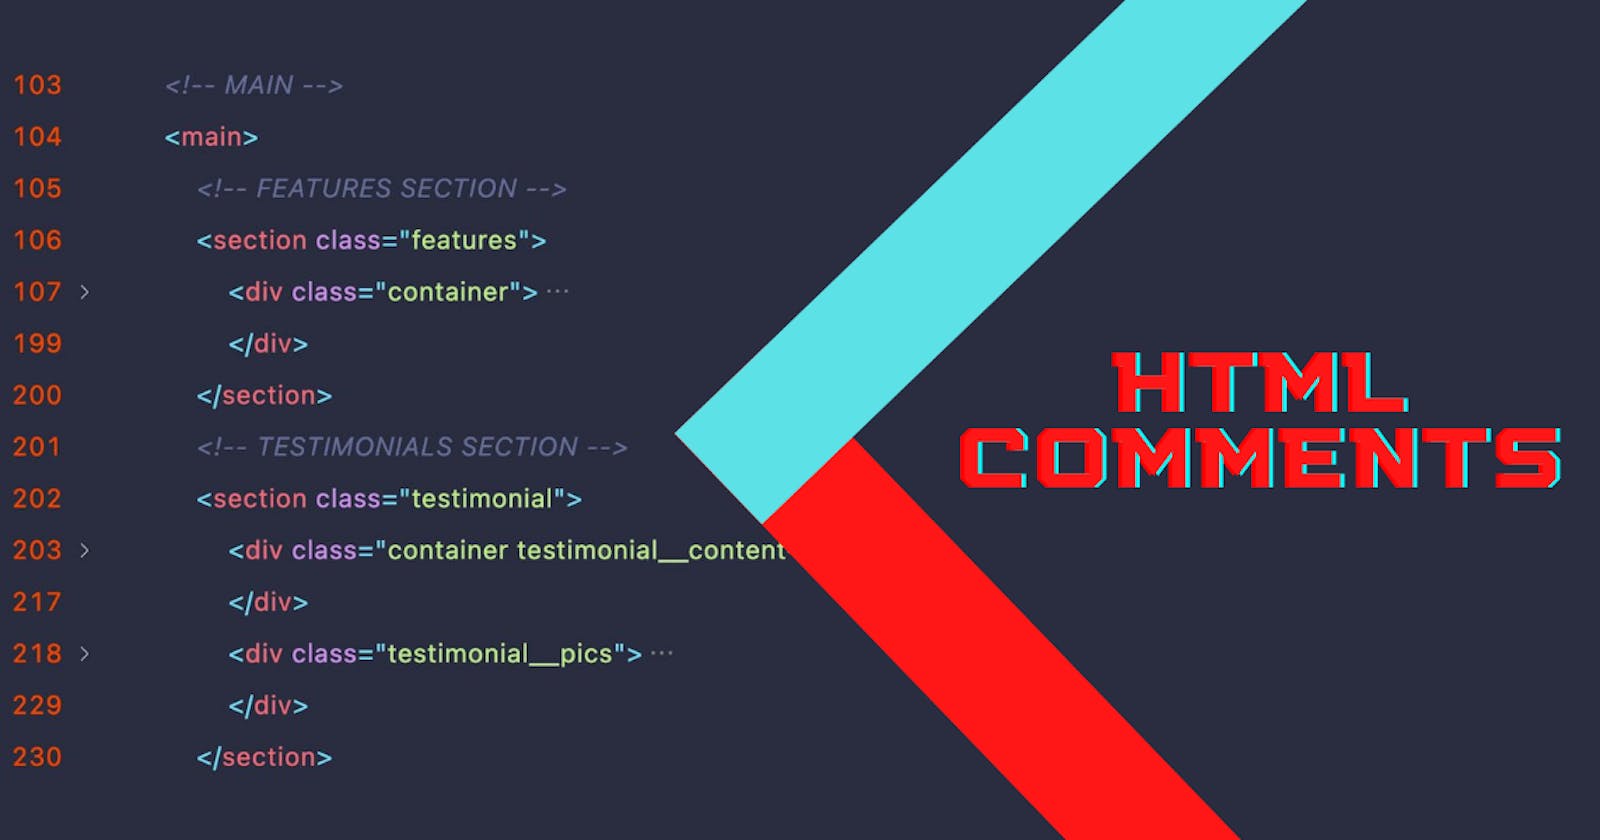 03 - HTML comments